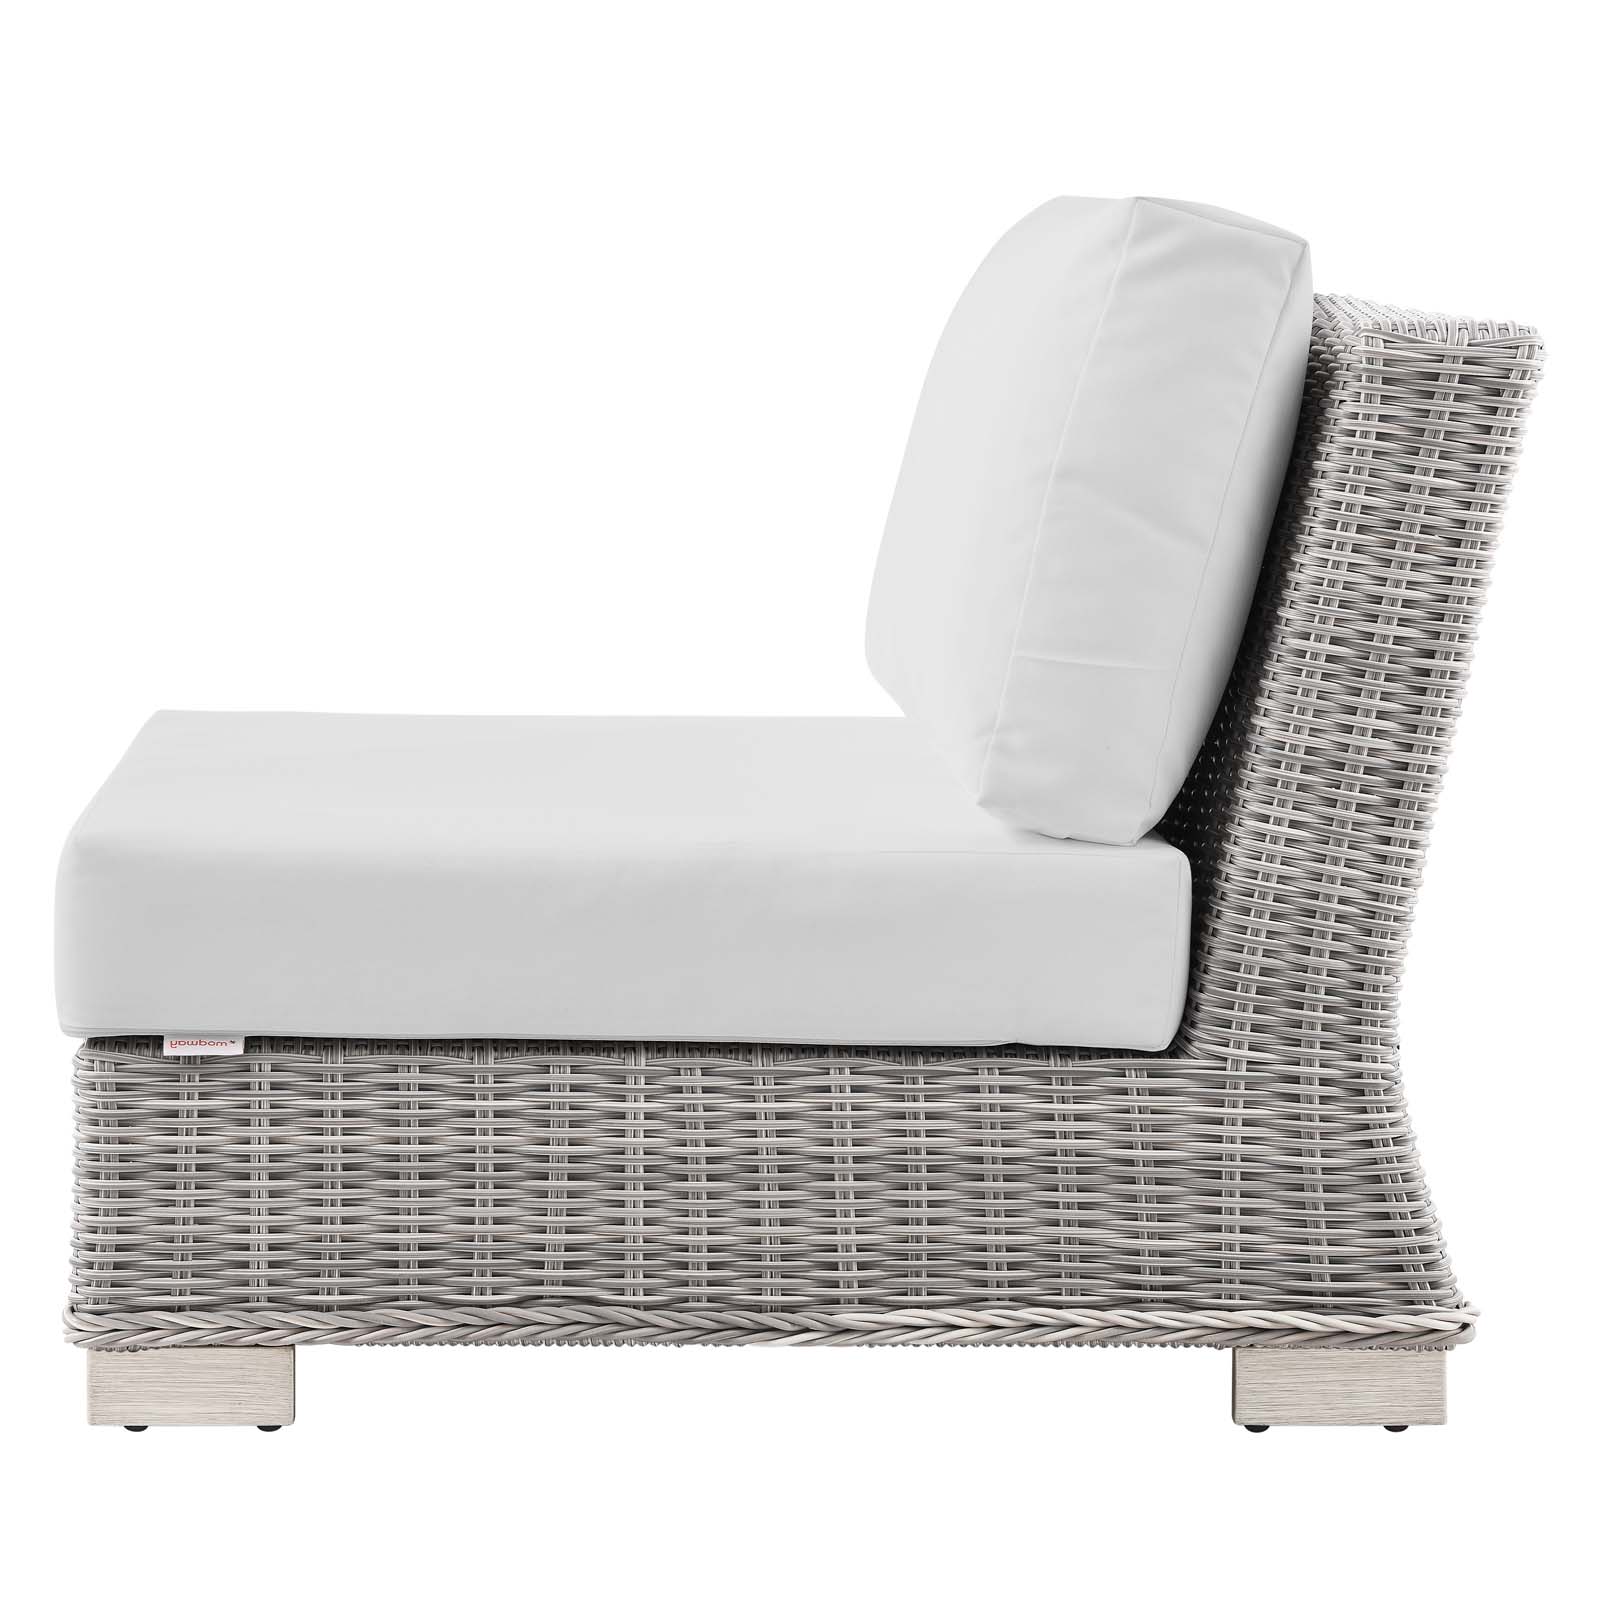 Lounge Sectional Sofa Chair Set, Rattan, Wicker, Light Grey Gray White, Modern Contemporary Urban Design, Outdoor Patio Balcony Cafe Bistro Garden Furniture Hotel Hospitality - image 4 of 10